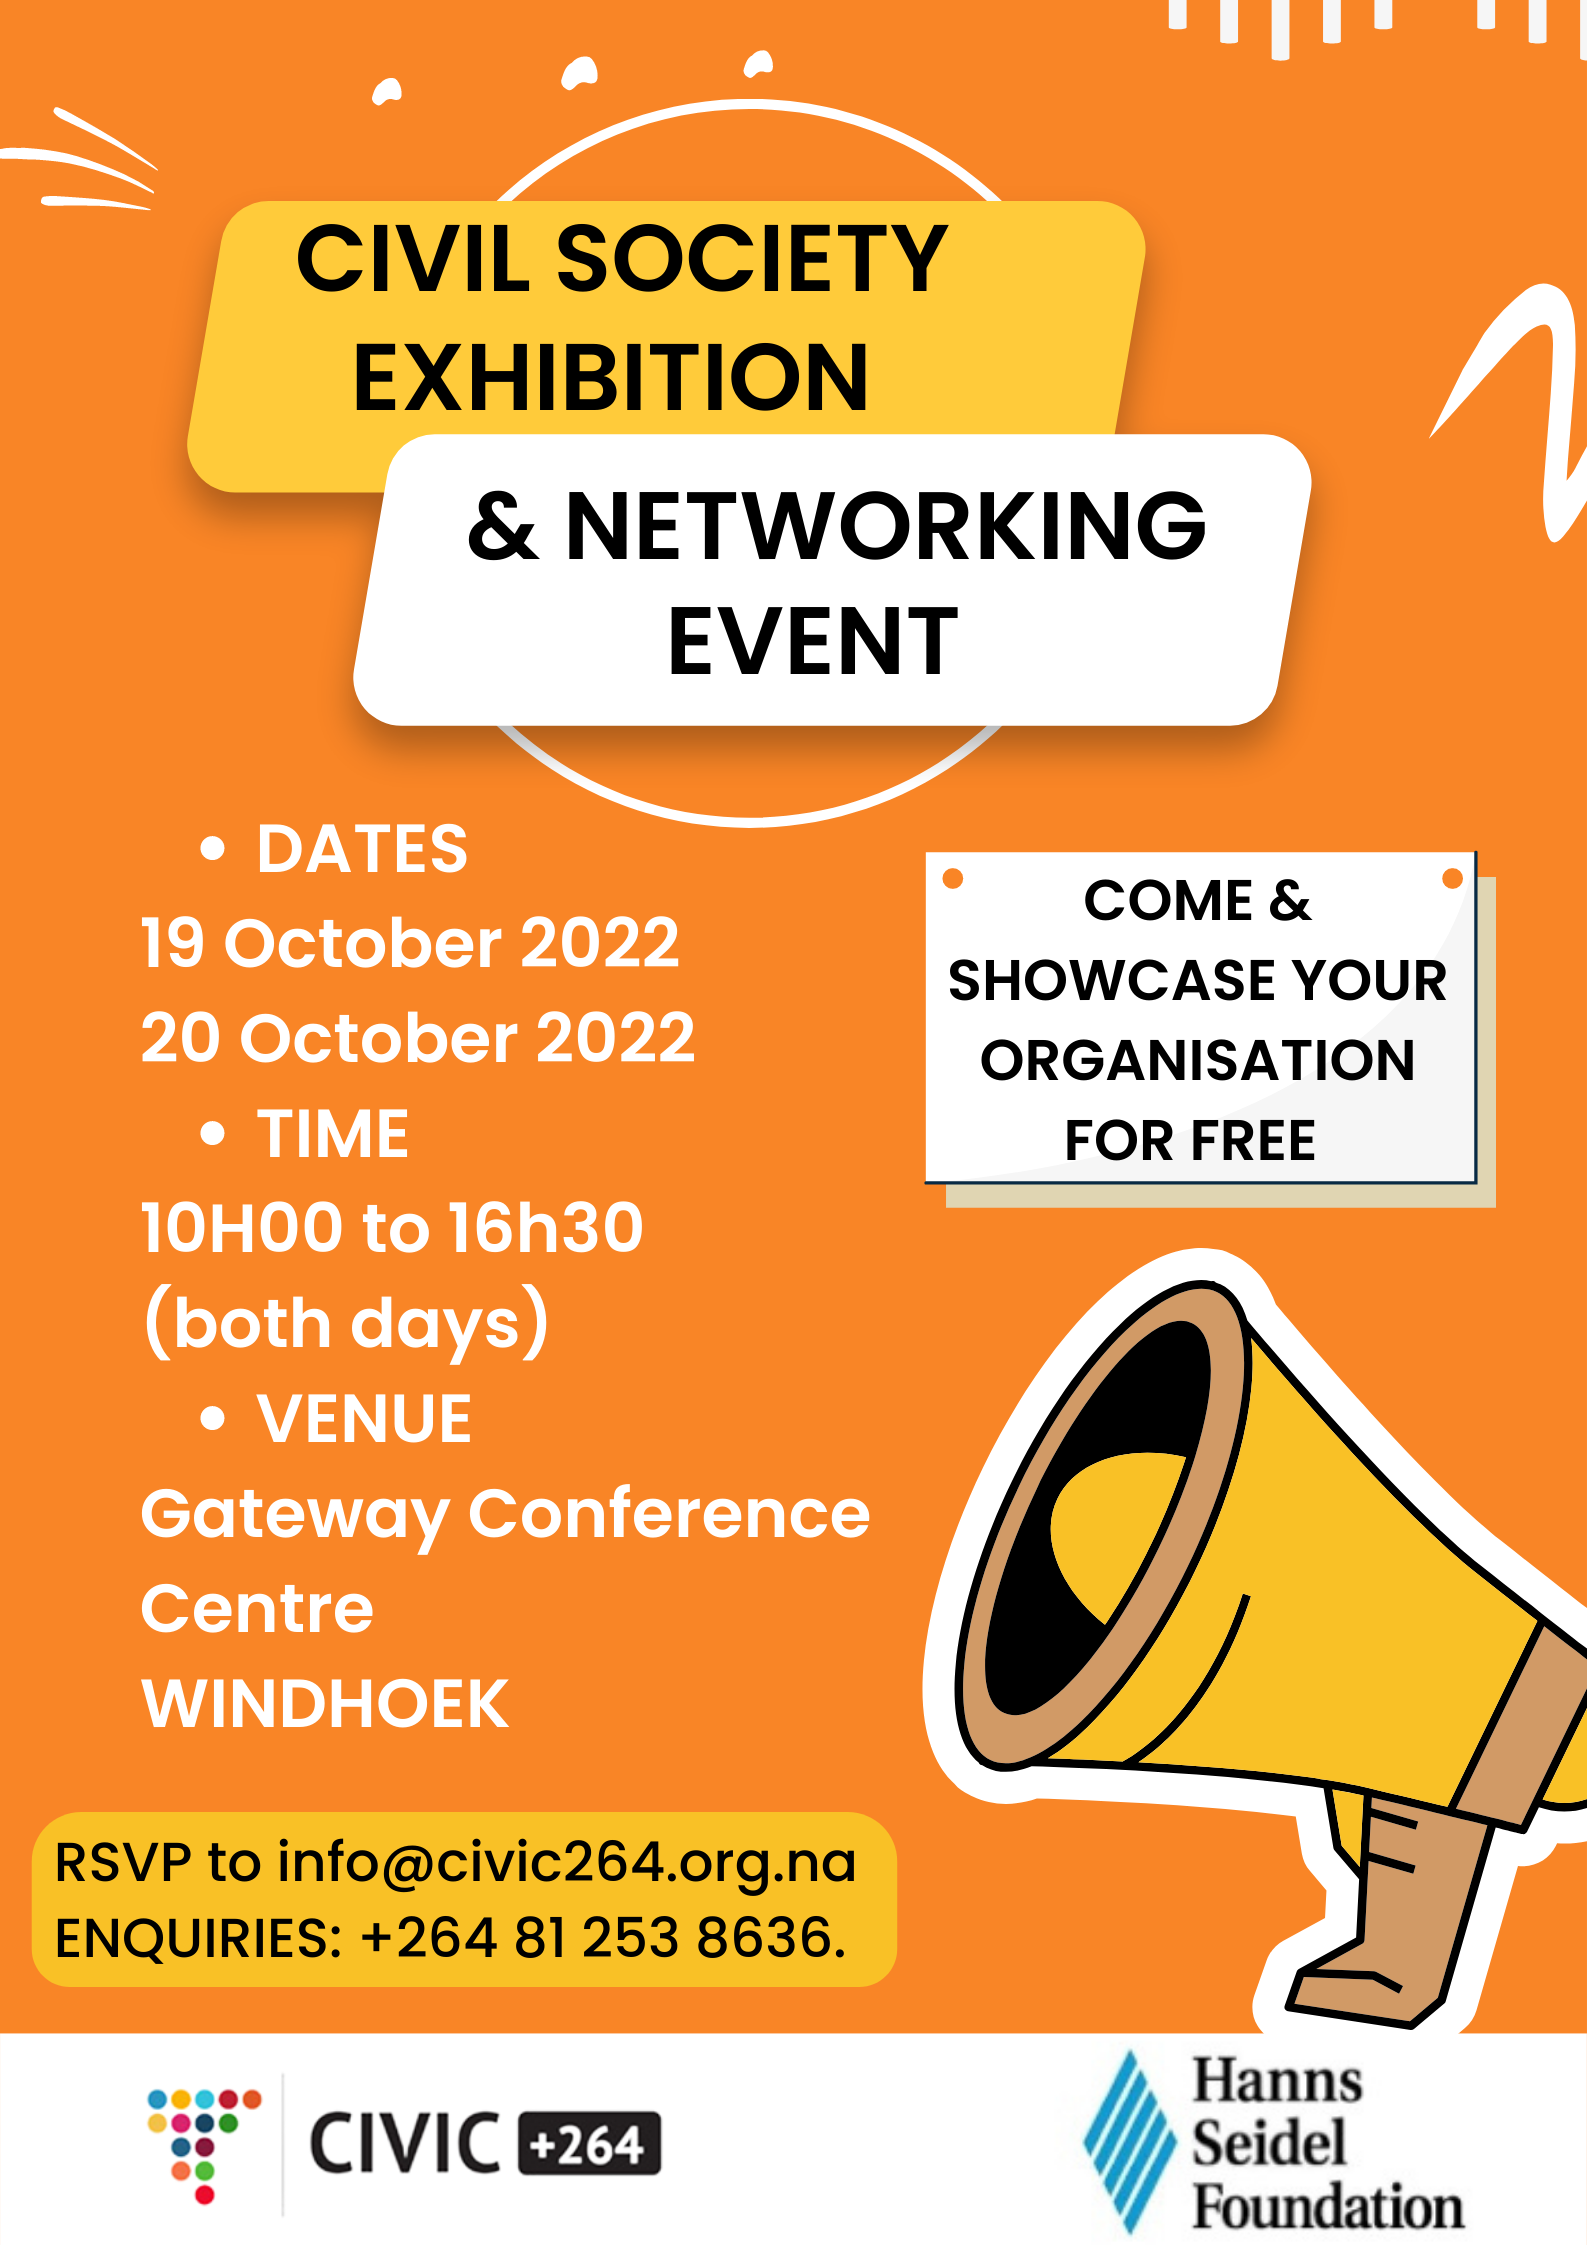 CIVIC 264 Activity 2022 10 19 20 Poster Civil Society Exhibition and Networking Event